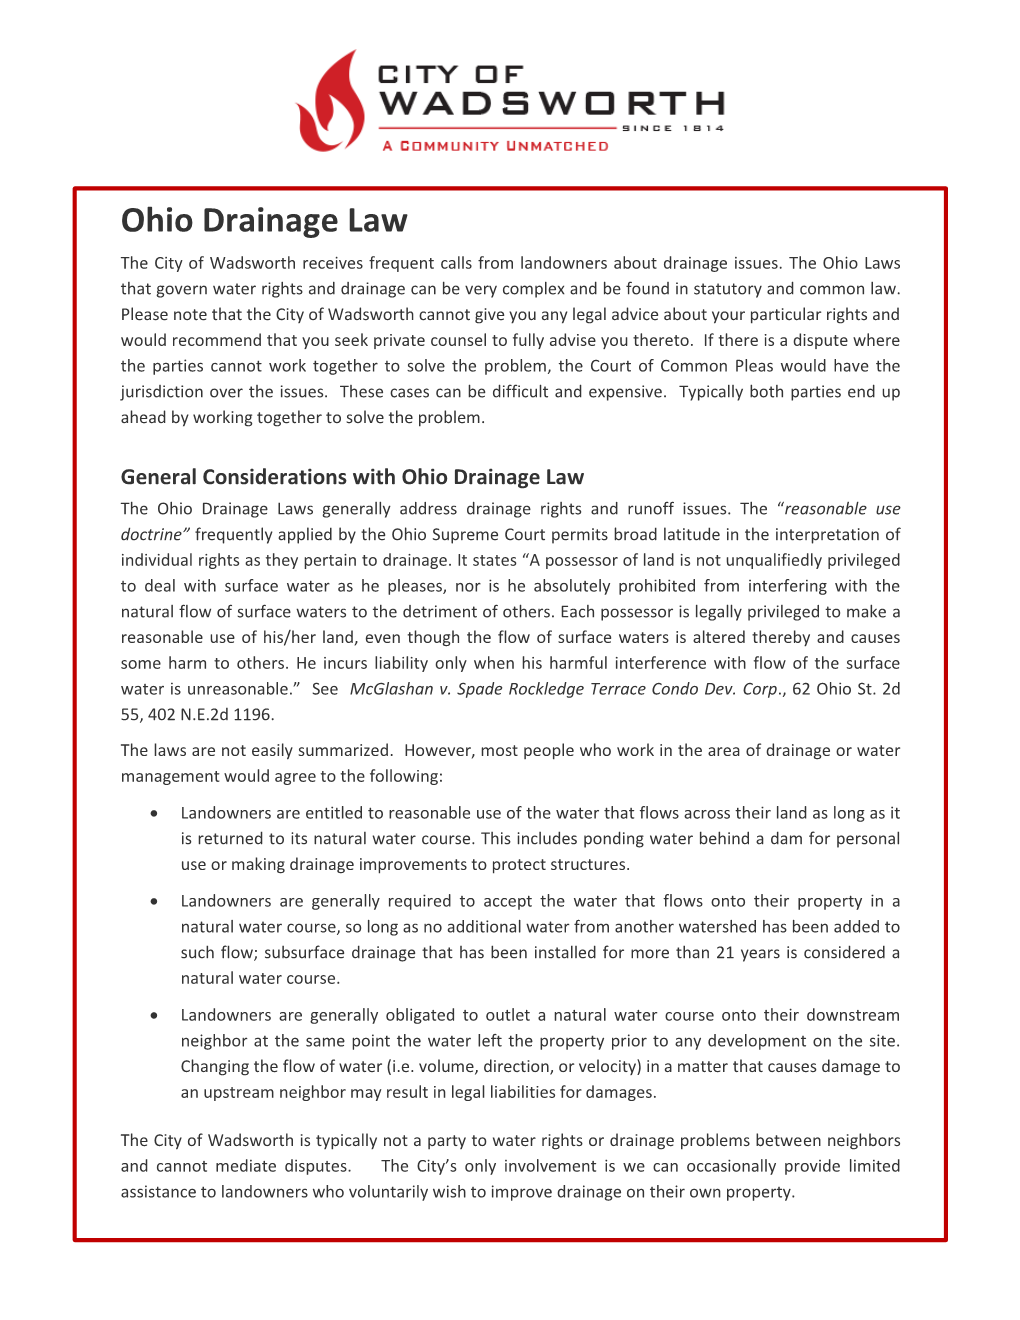 Ohio Drainage Law the City of Wadsworth Receives Frequent Calls from Landowners About Drainage Issues